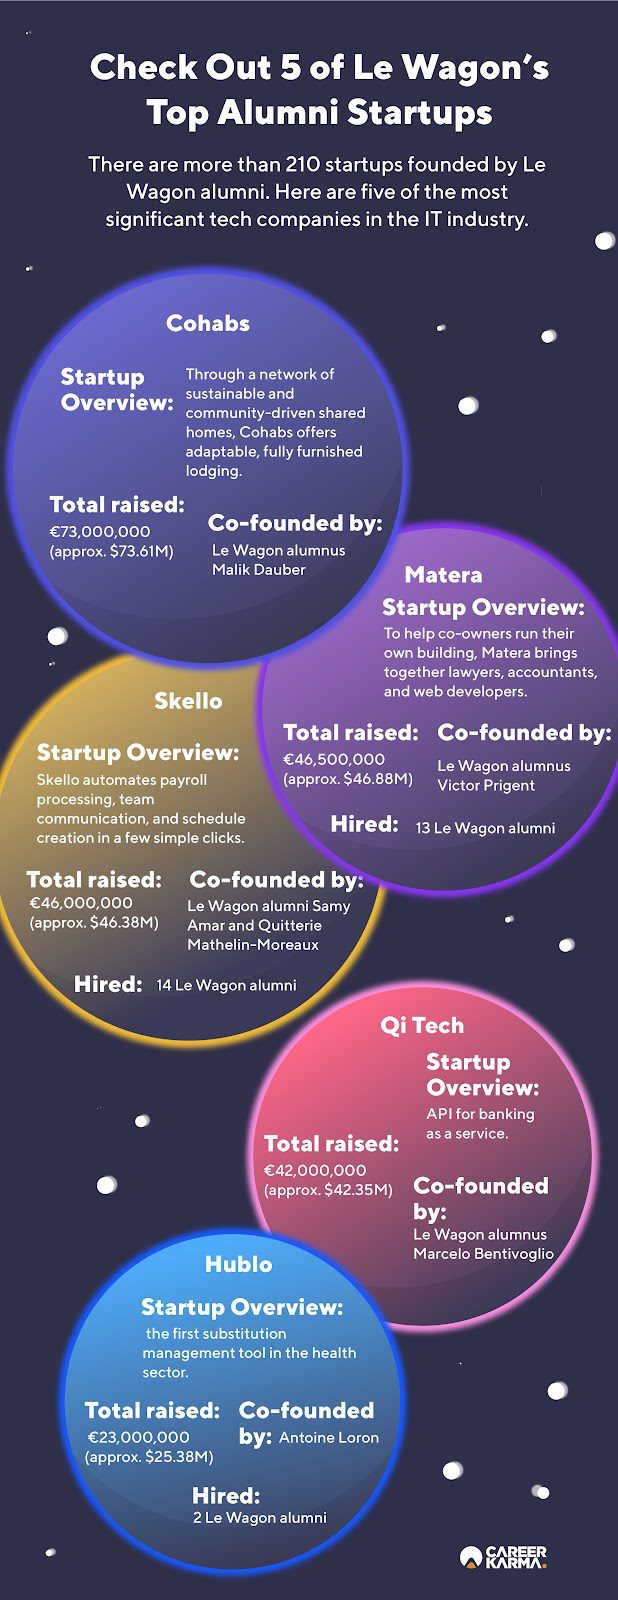 An infographic featuring five tech startups built by Le Wagon alumni